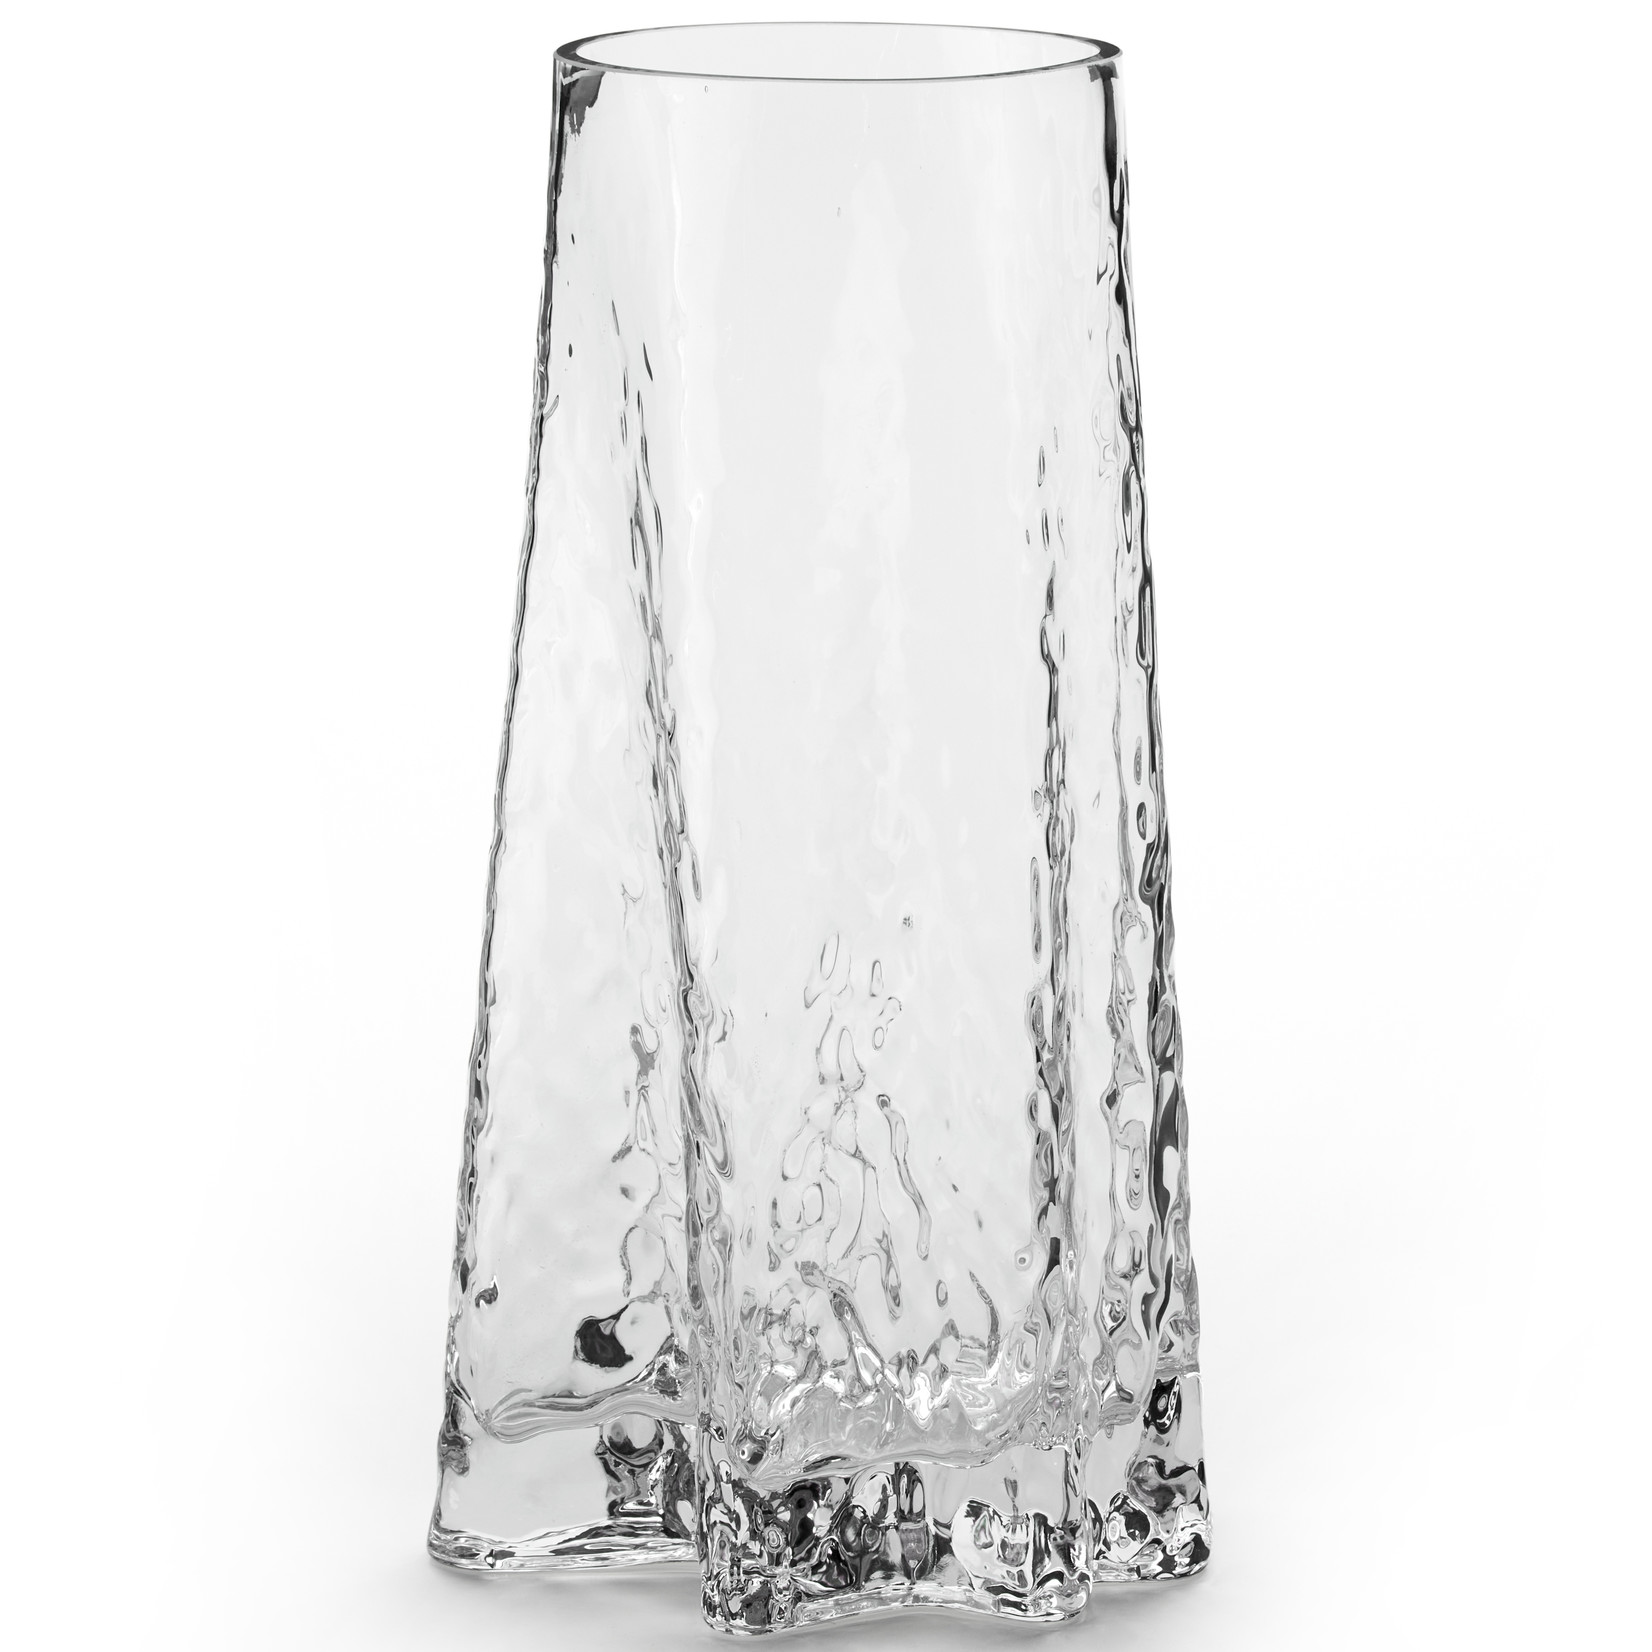 Cooee Design GRY VASE 30CM CLEAR